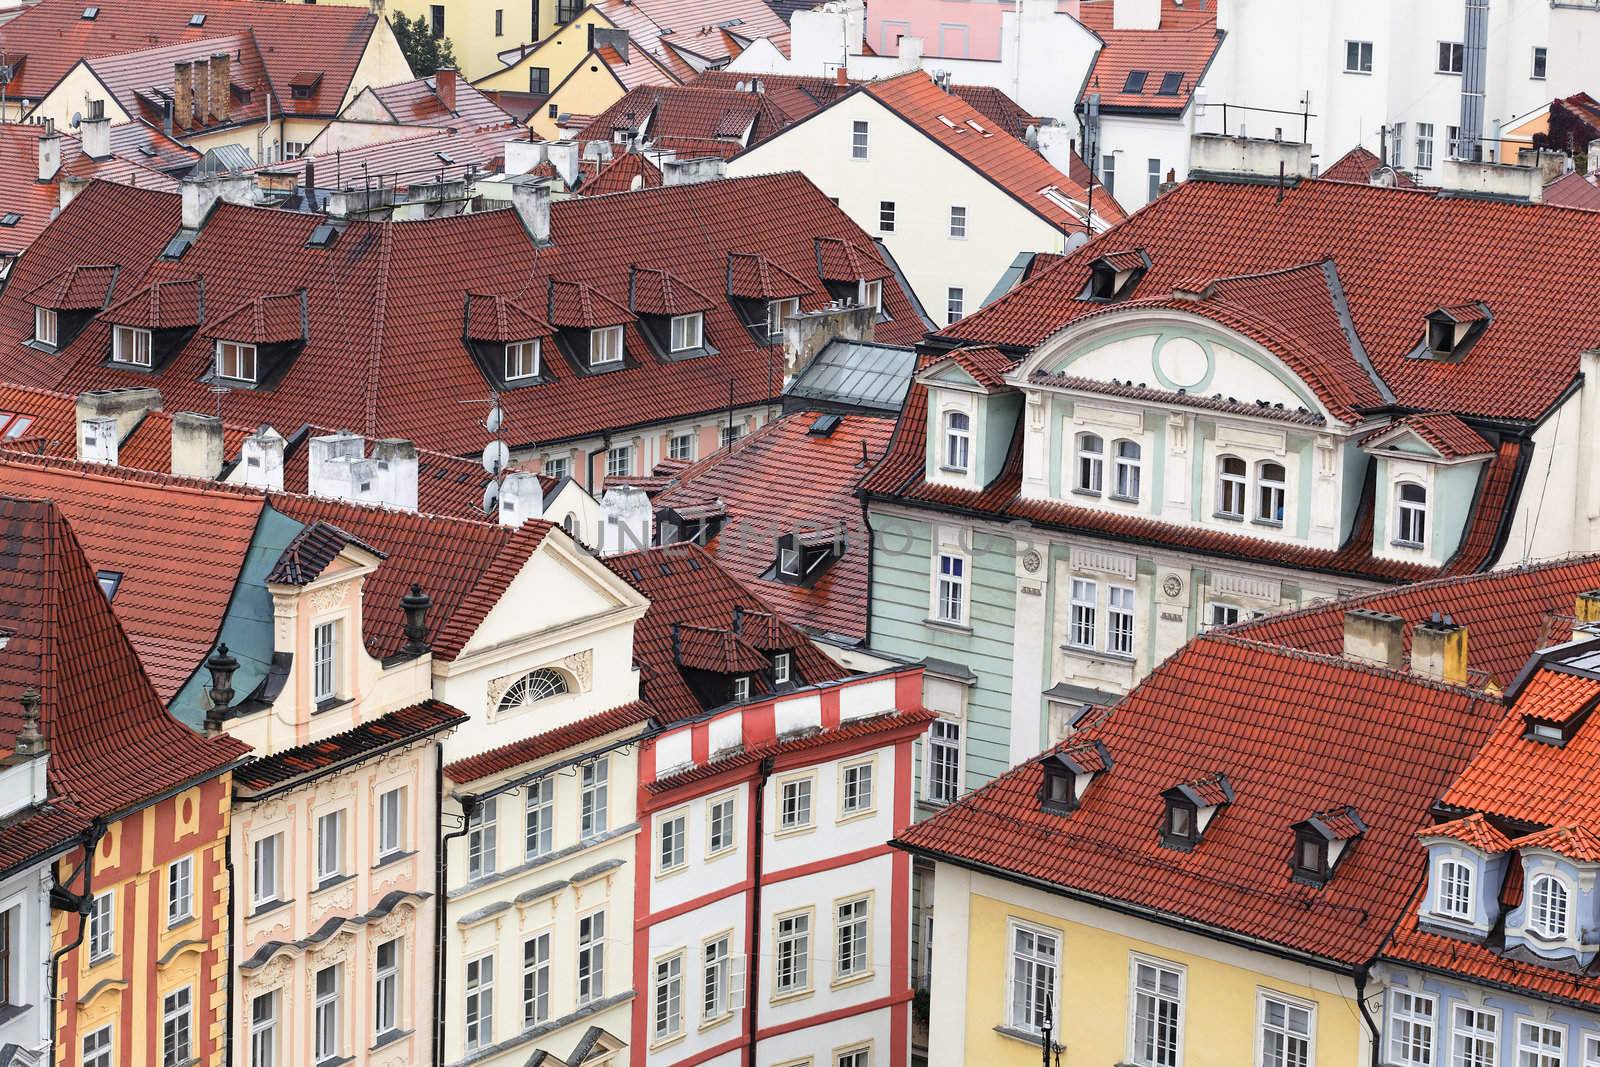 Prague roofs by vwalakte